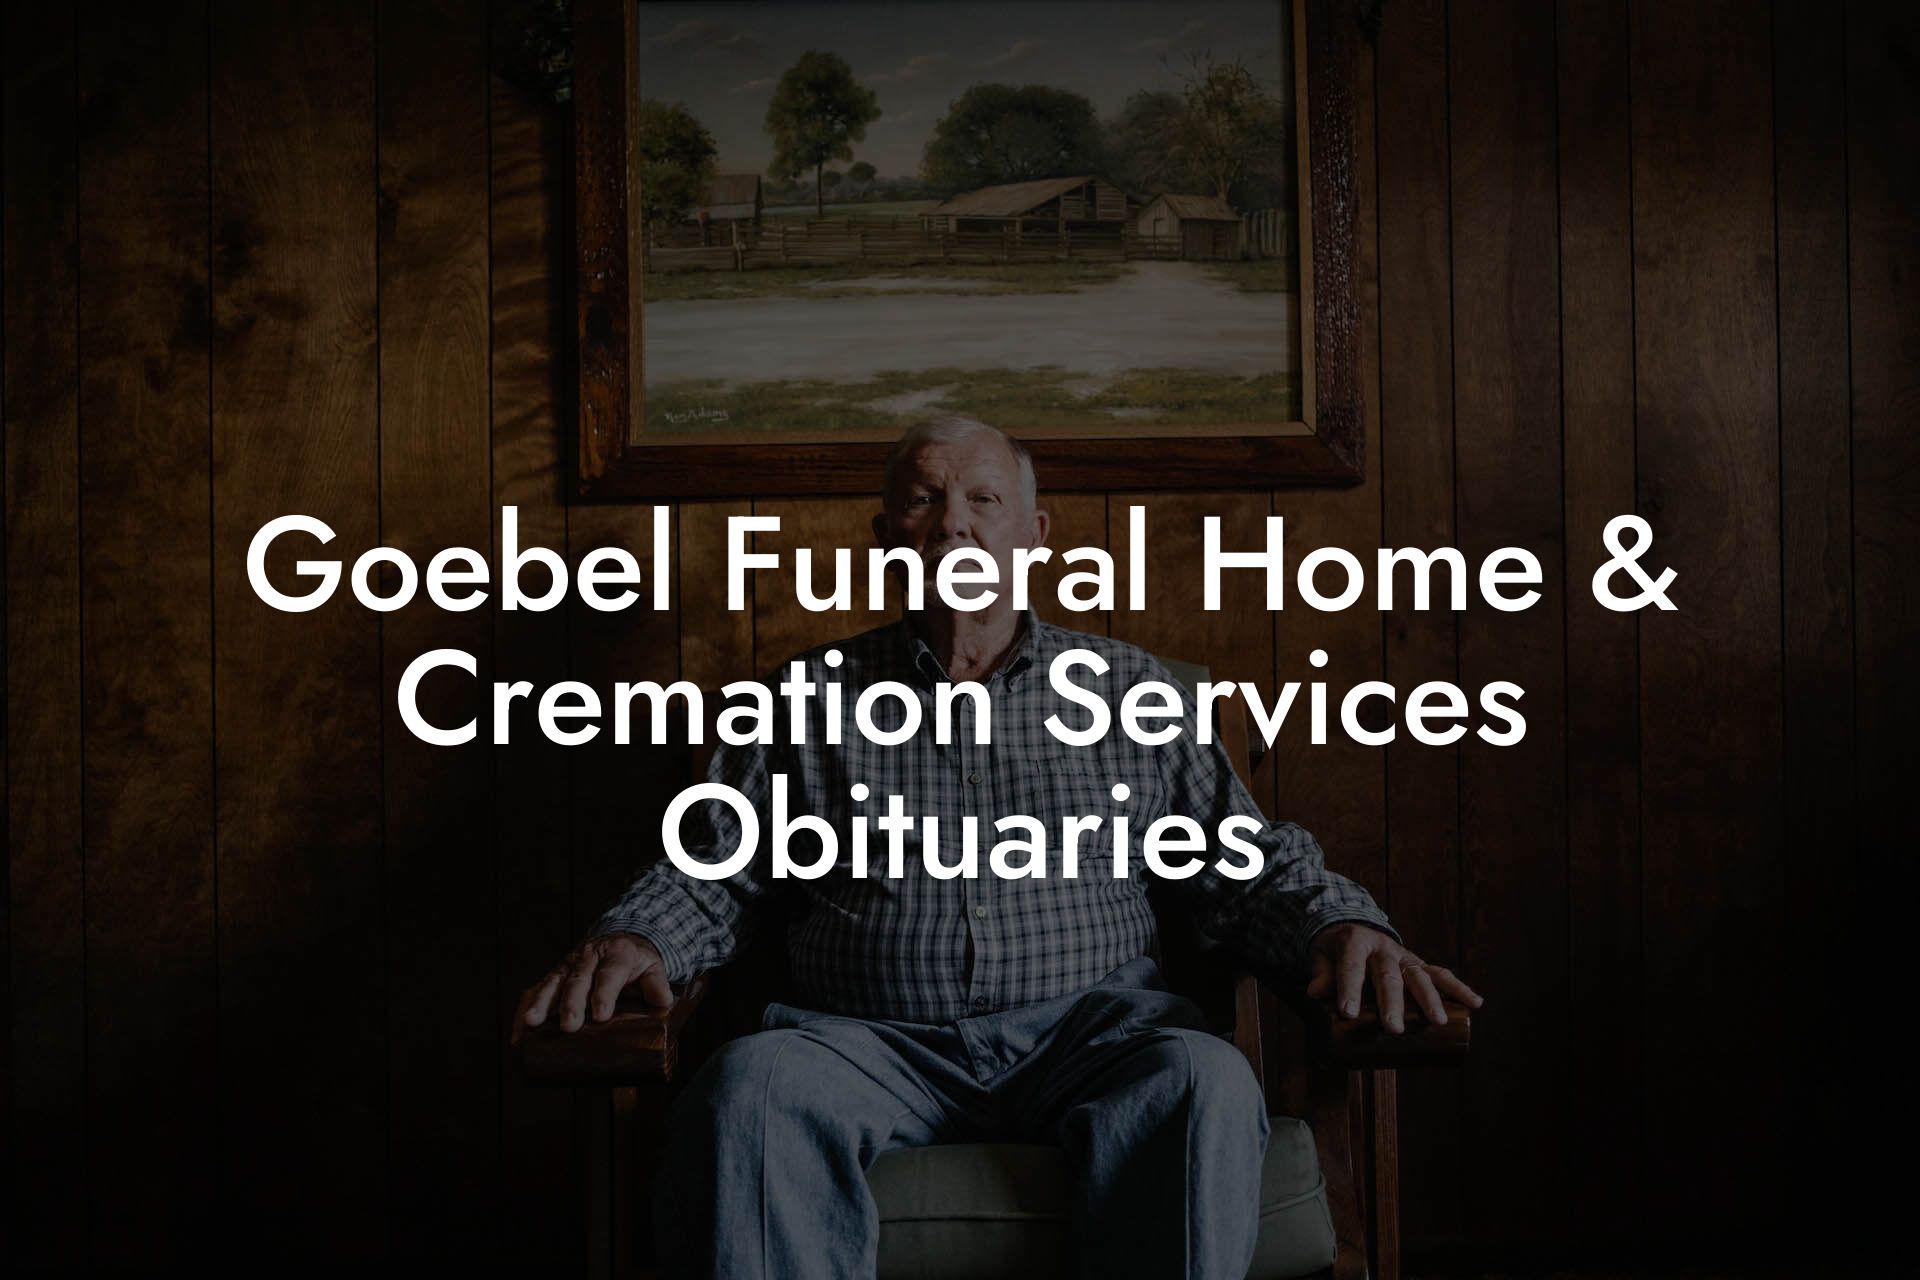 Goebel Funeral Home & Cremation Services Obituaries